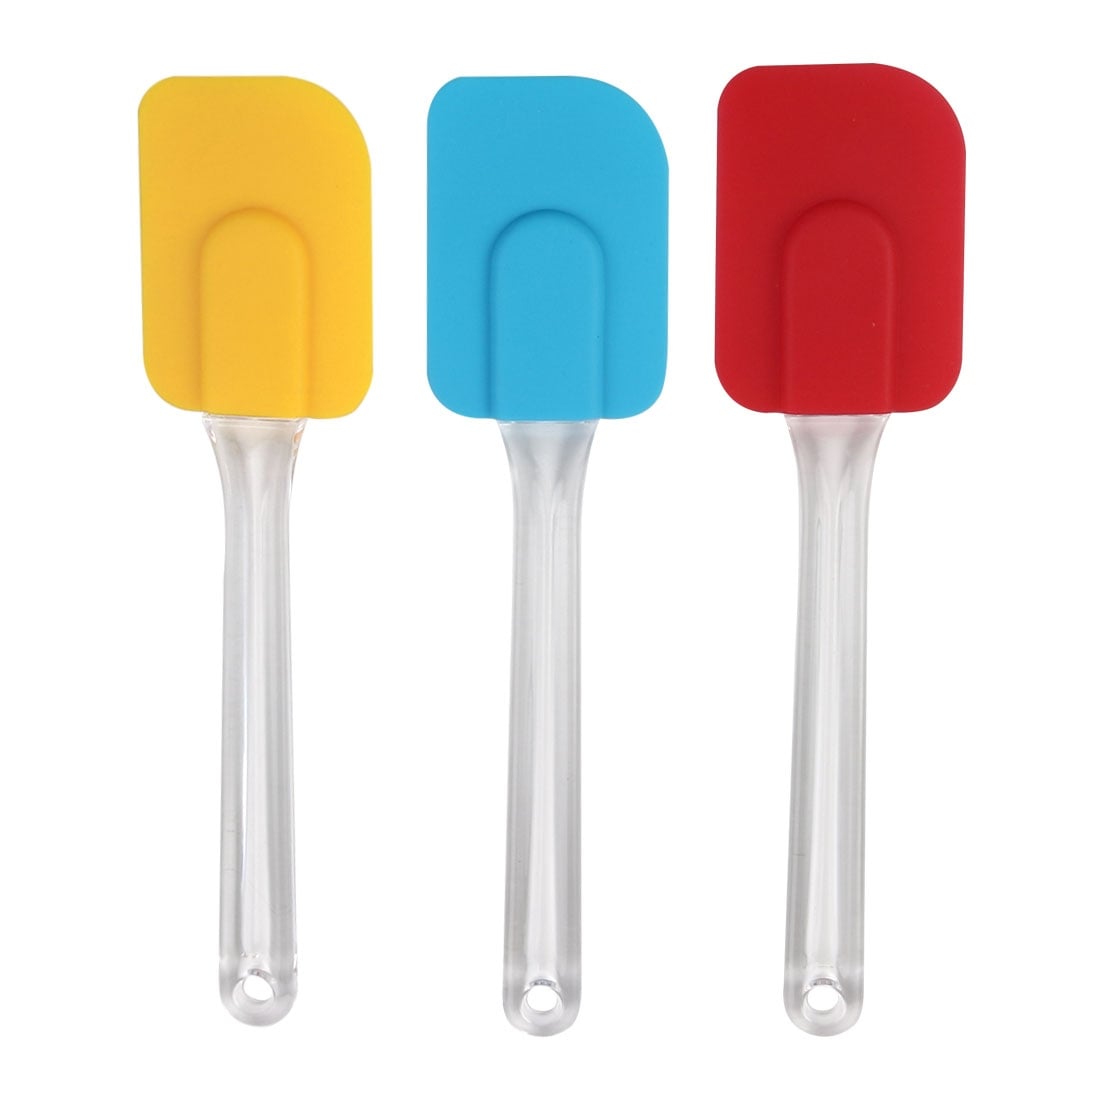 https://ak1.ostkcdn.com/images/products/is/images/direct/7f54a8aa4328fcbd7e9ff597b38b83d7fdf79612/3pcs-Flexible-Silicone-Spatula-Set-Heat-Resistant-Kitchen-Non-Stick-Spatula-Set-for-Cooking-Baking-Blue-Yellow-Red.jpg